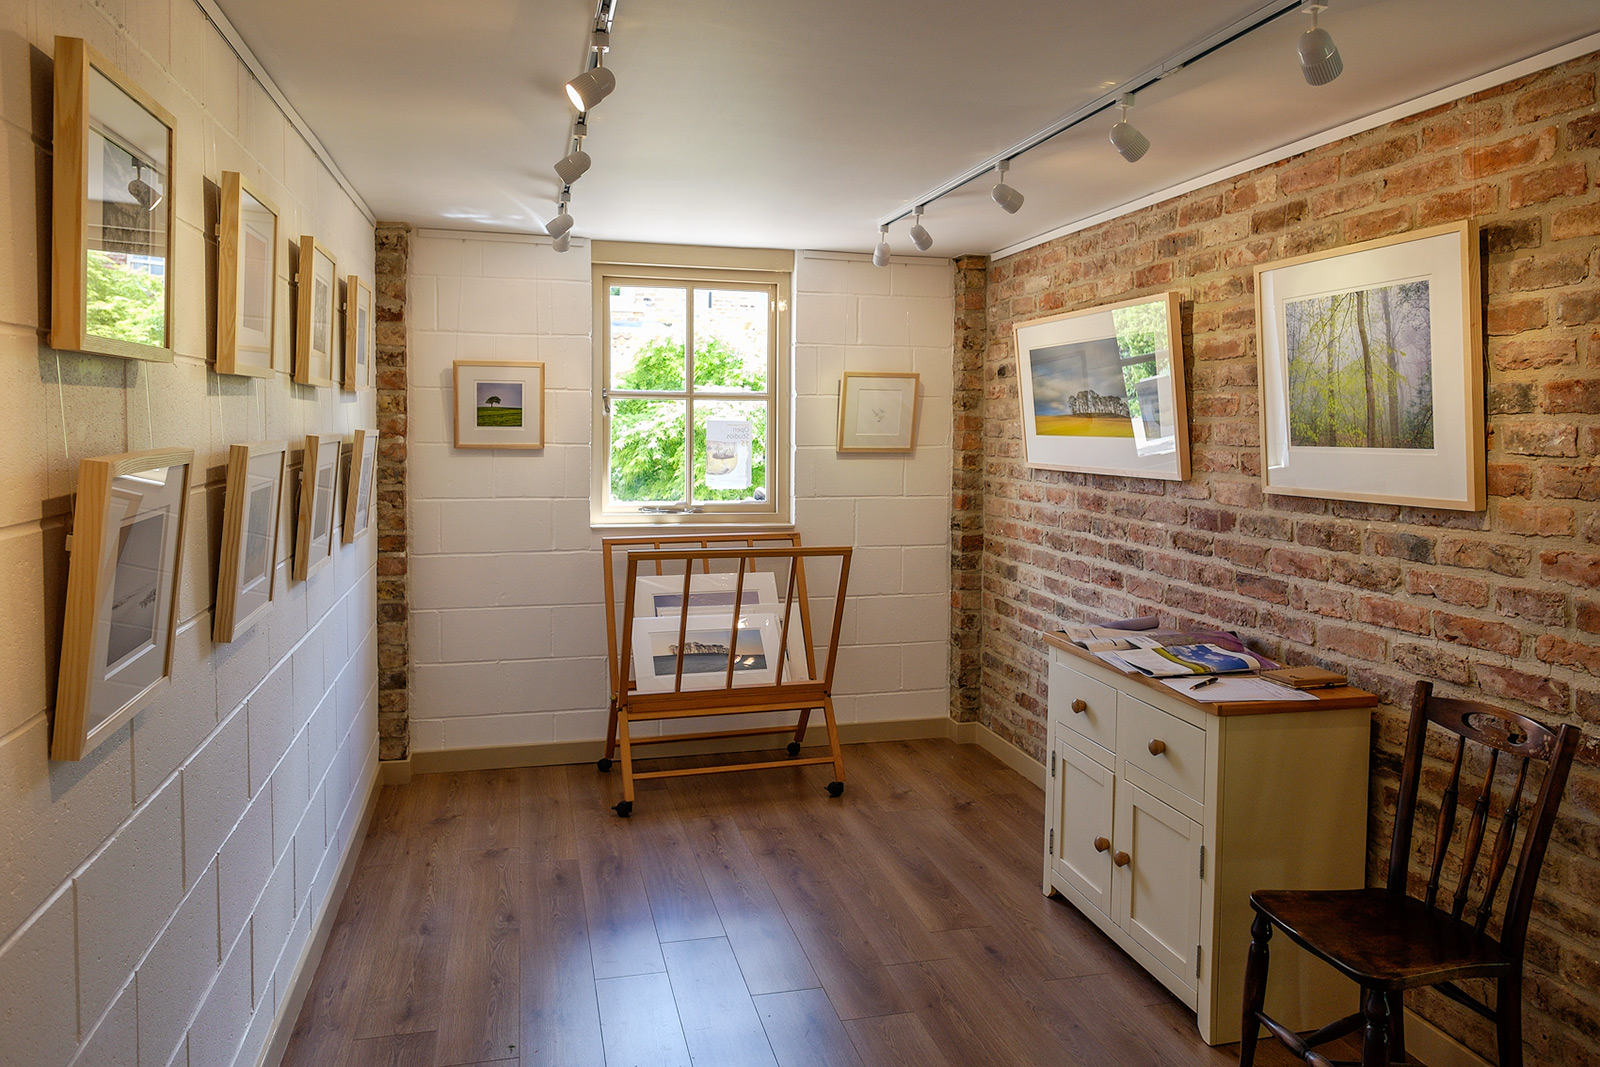 My new studio / gallery - the first few pictures are on the walls, with many more going up this week!